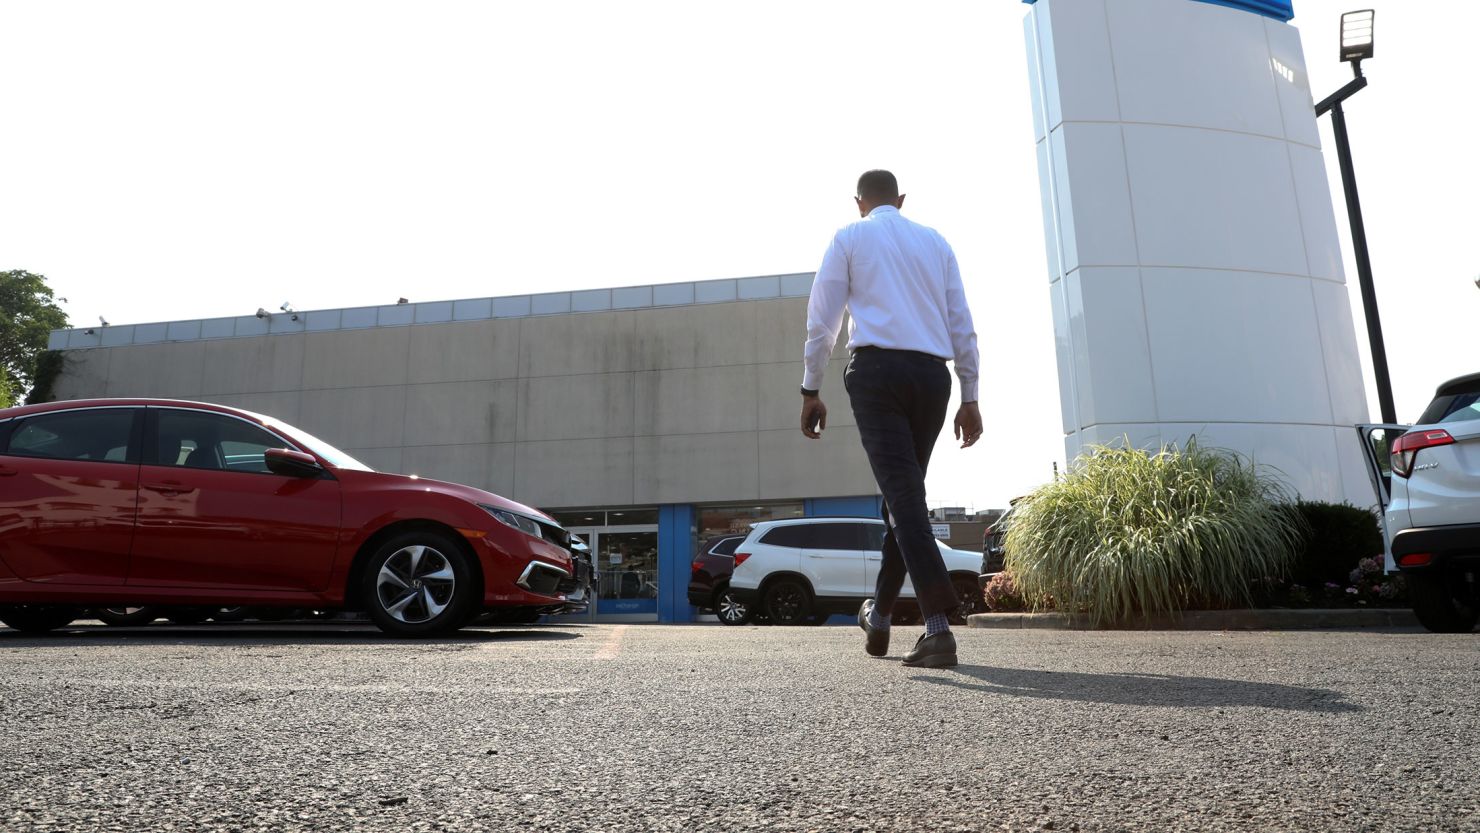 A worker walks through the lot of Paragon Honda and Acura car dealership in the Queens borough of New York on Thursday, July 15, 2021.